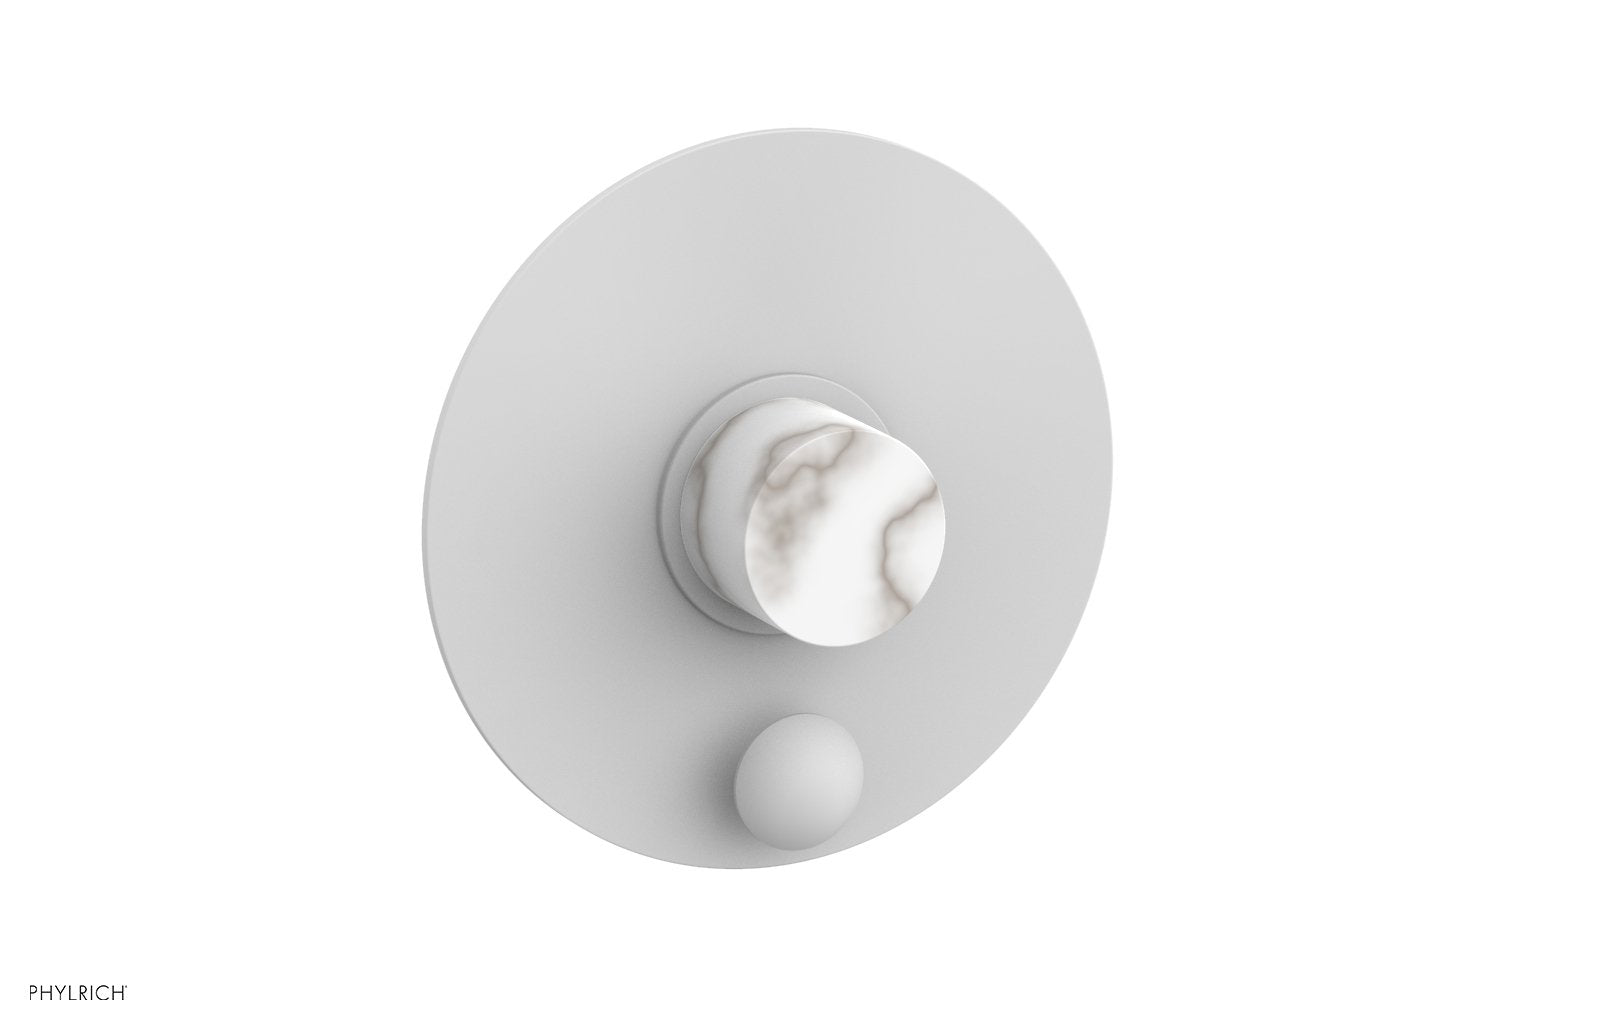 Phylrich BASIC II Pressure Balance Shower Plate with Diverter and Handle Trim Set - White Marble